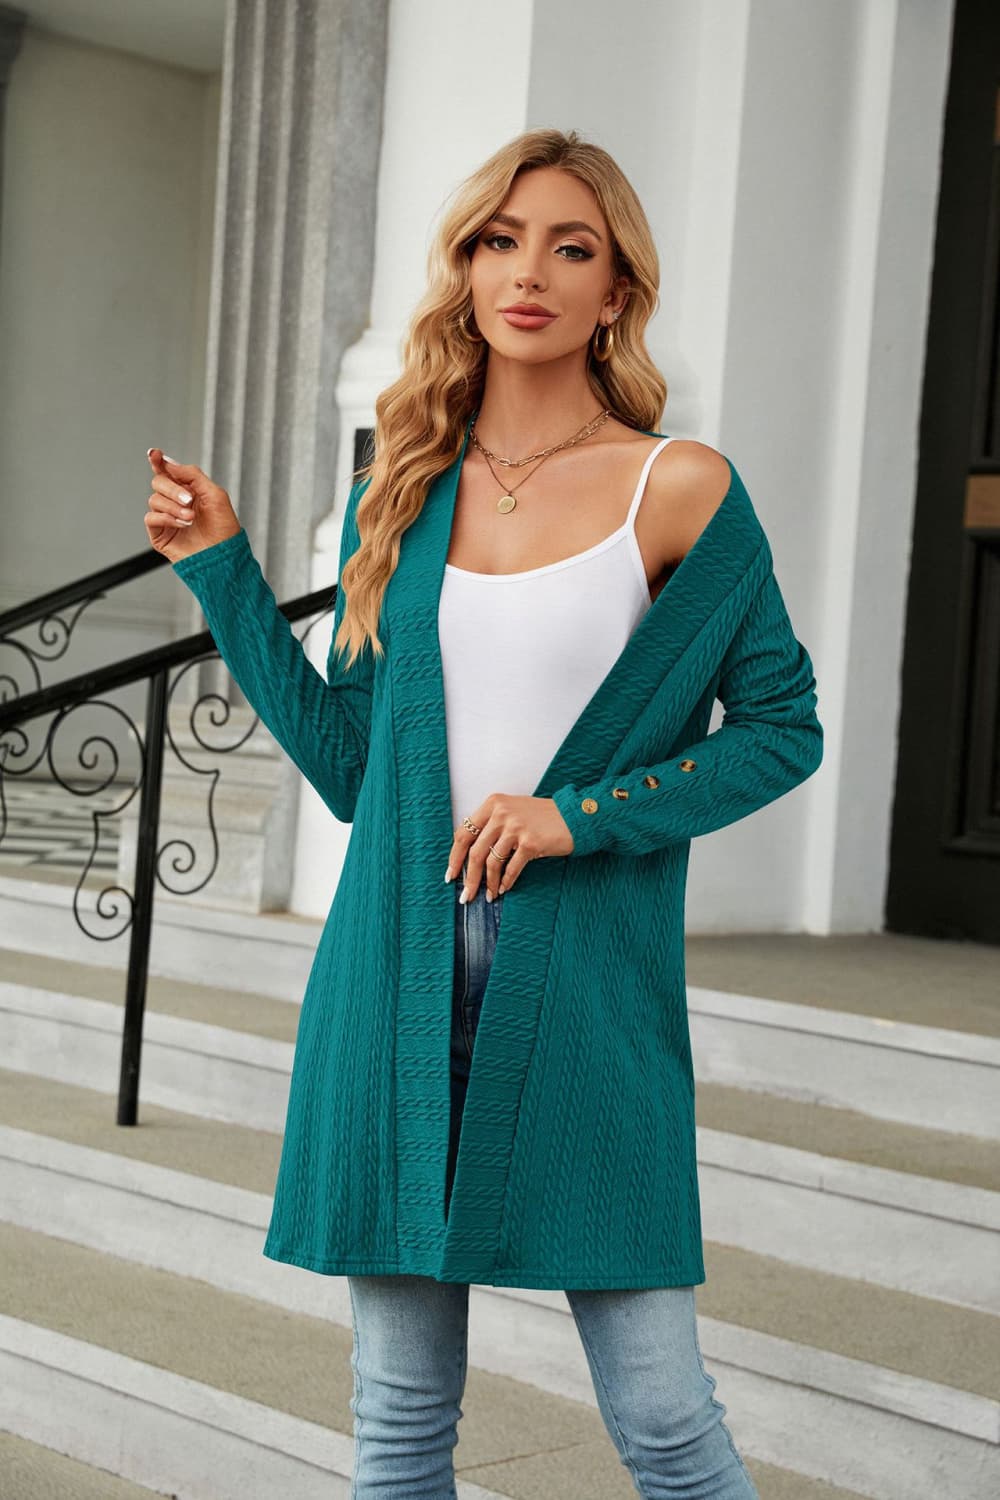 Long Sleeve Open Front Cardigan - Women’s Clothing & Accessories - Shirts & Tops - 11 - 2024